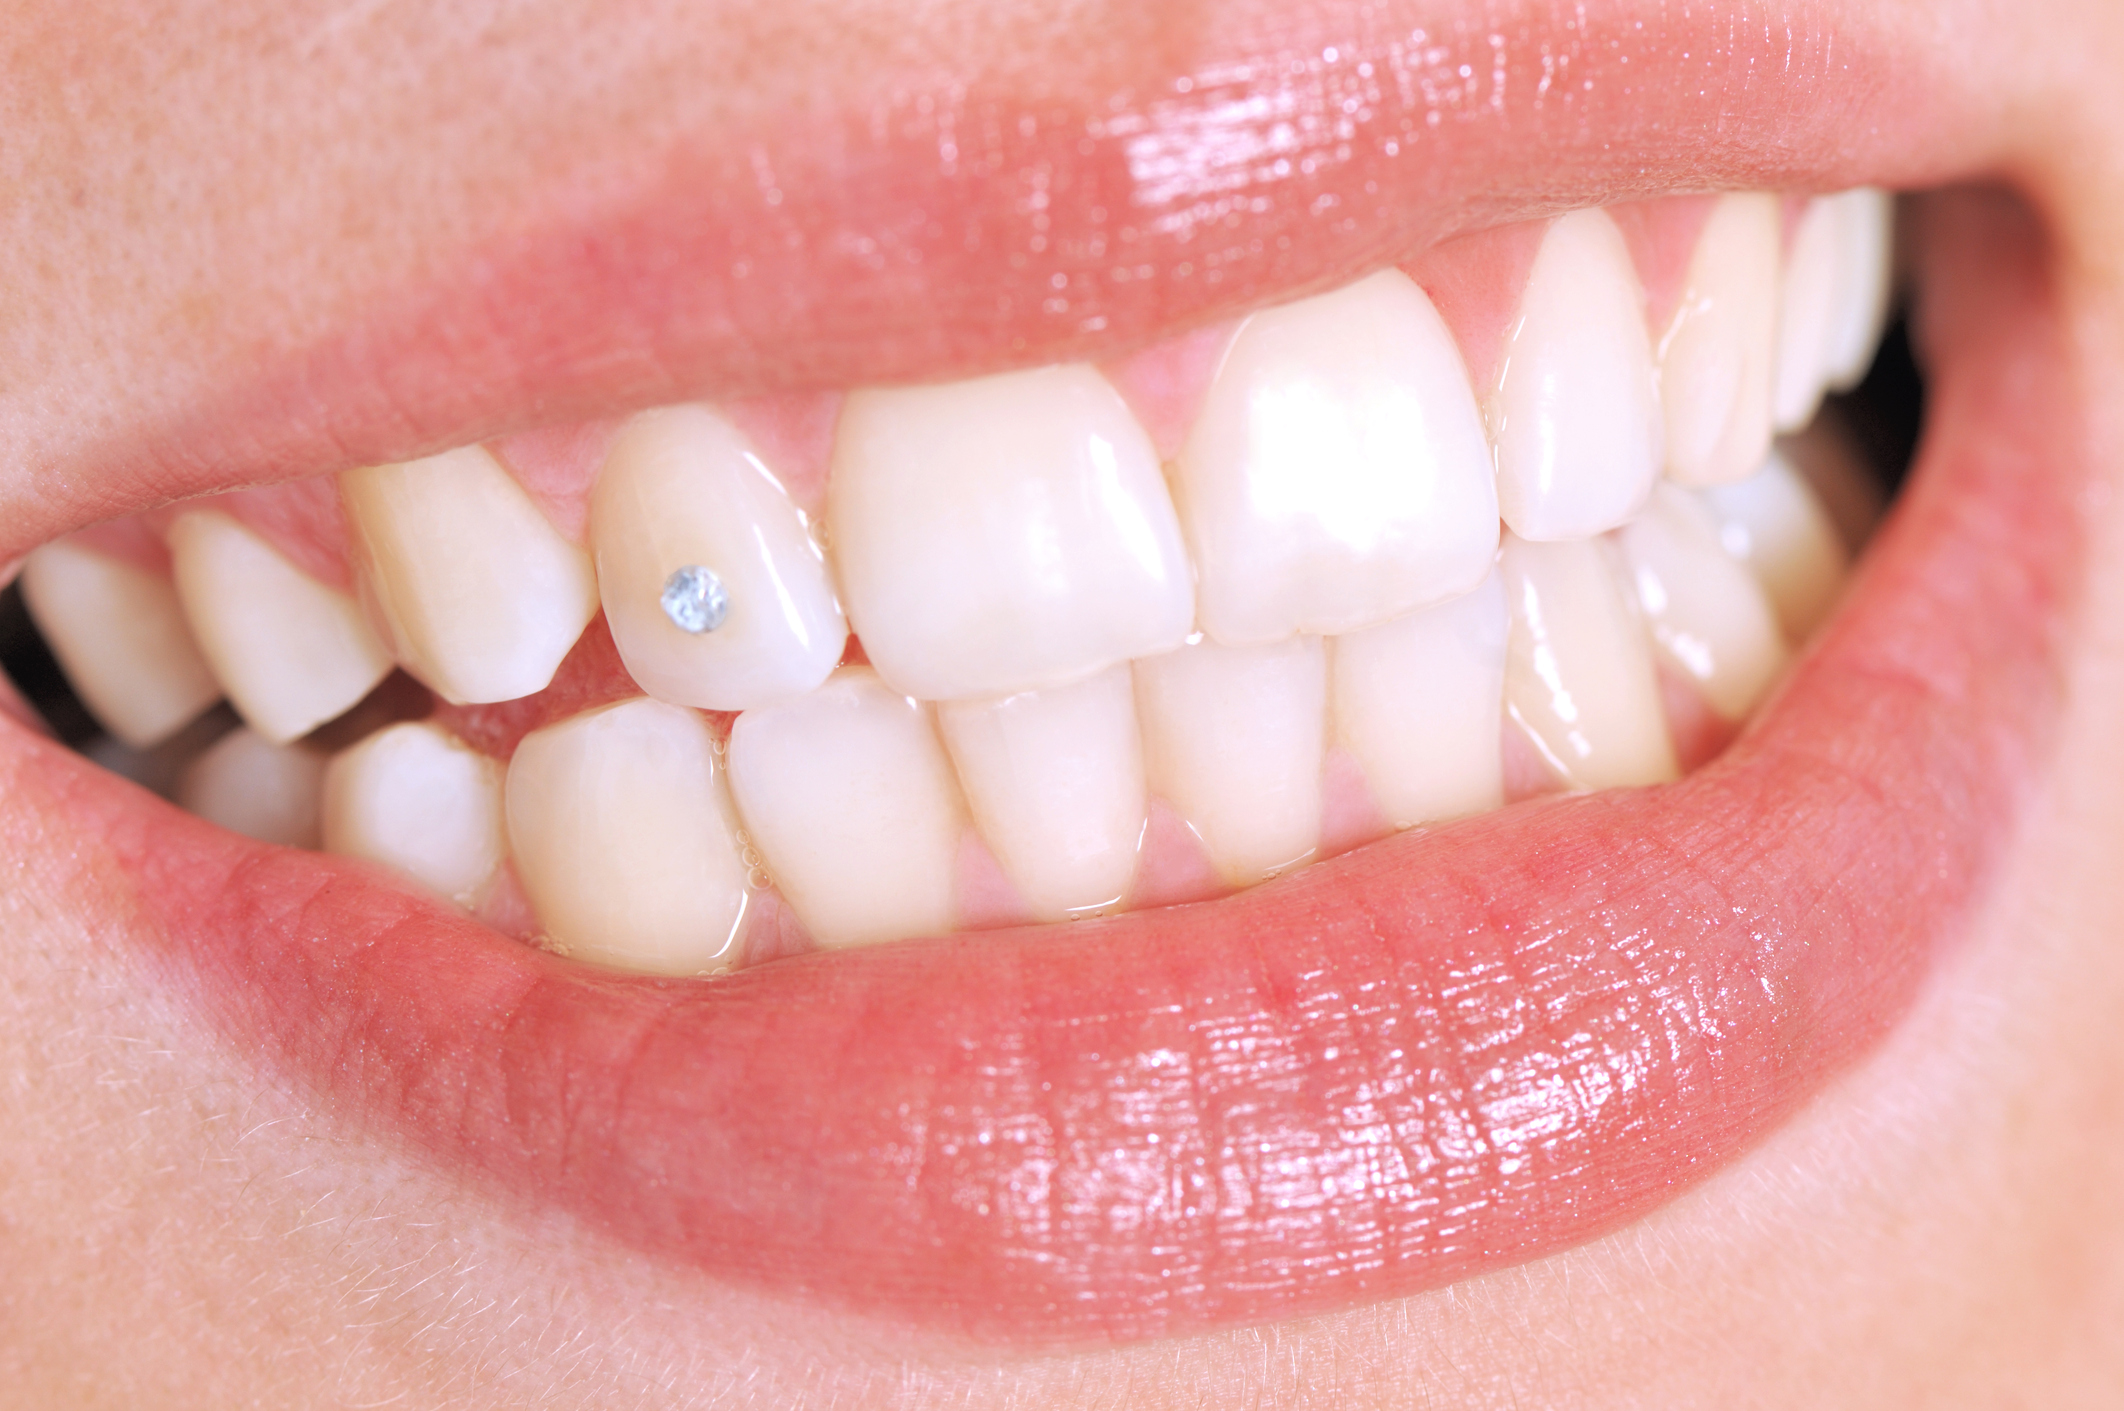 Tooth Gems: Are They Safe for Your Teeth?